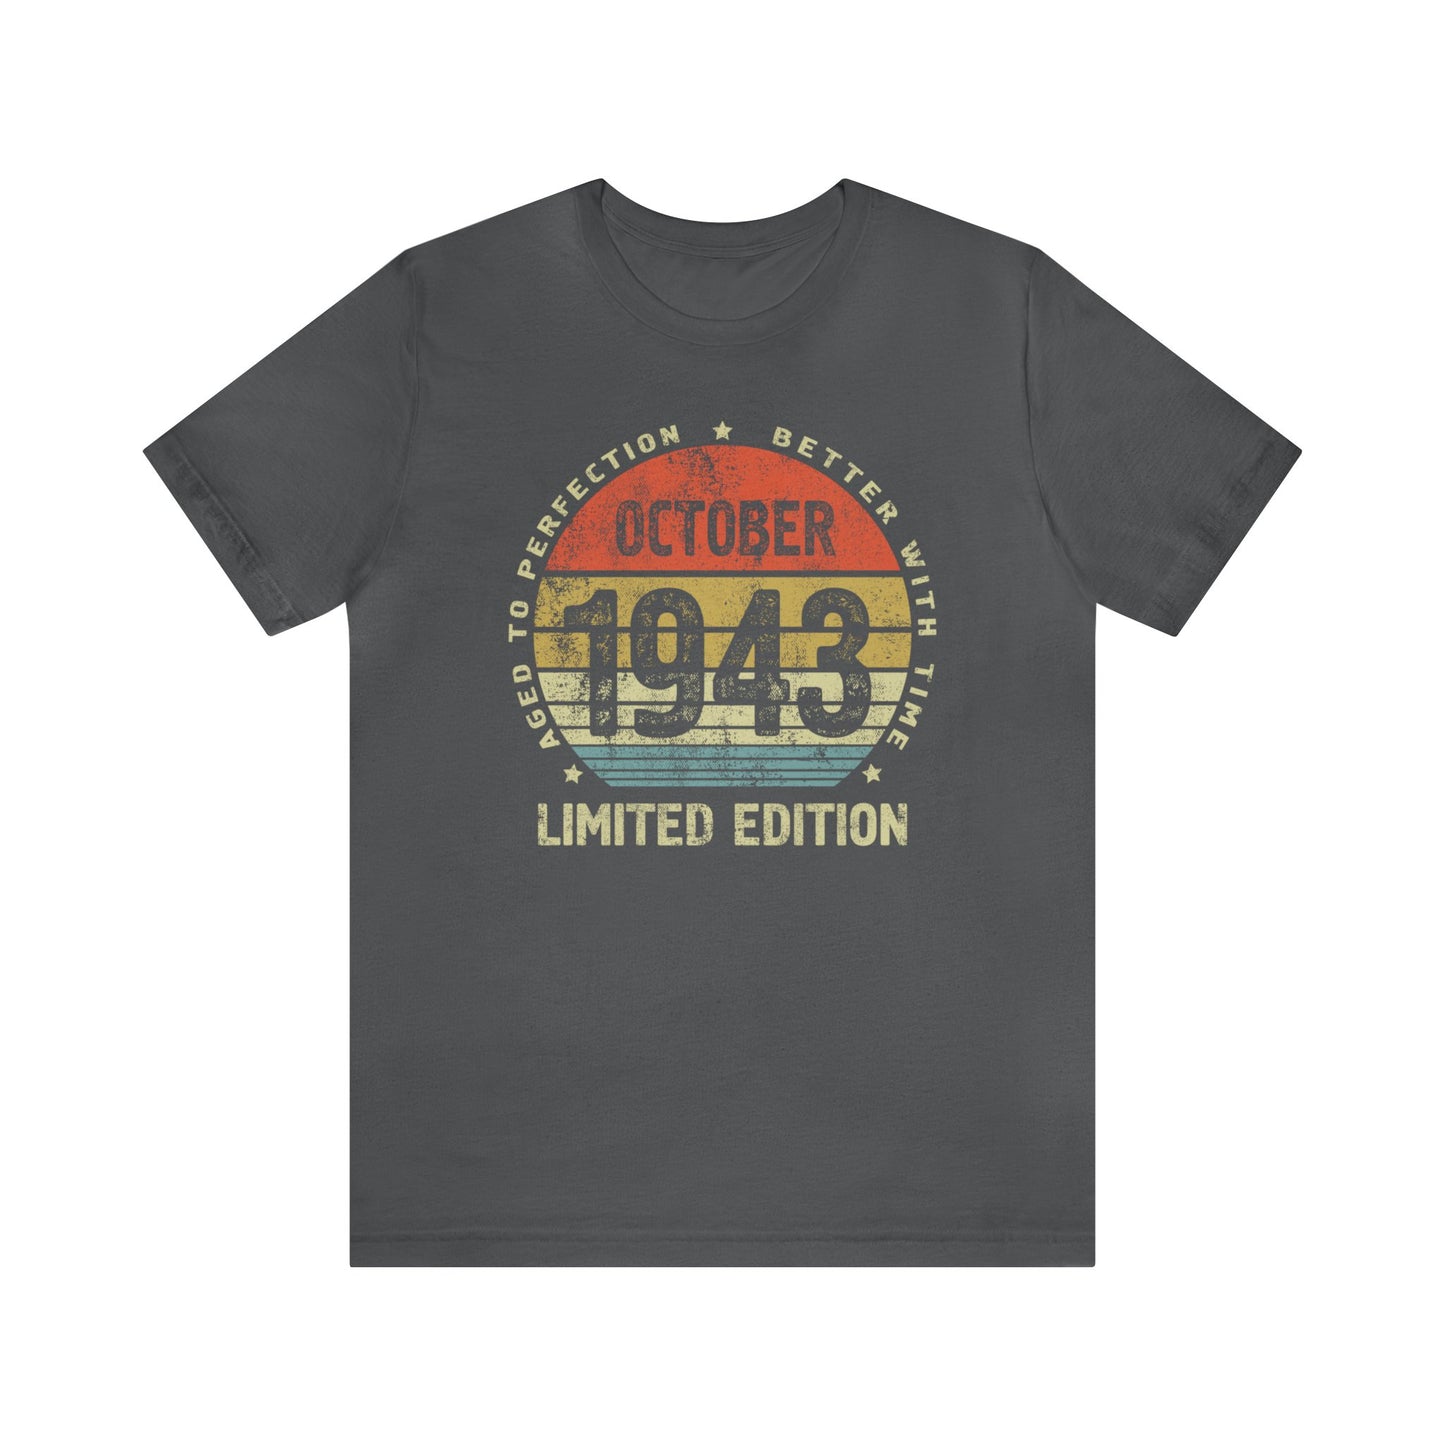 80th birthday gift shirt for men or women 1943 Personalized Shirt for wife or husband